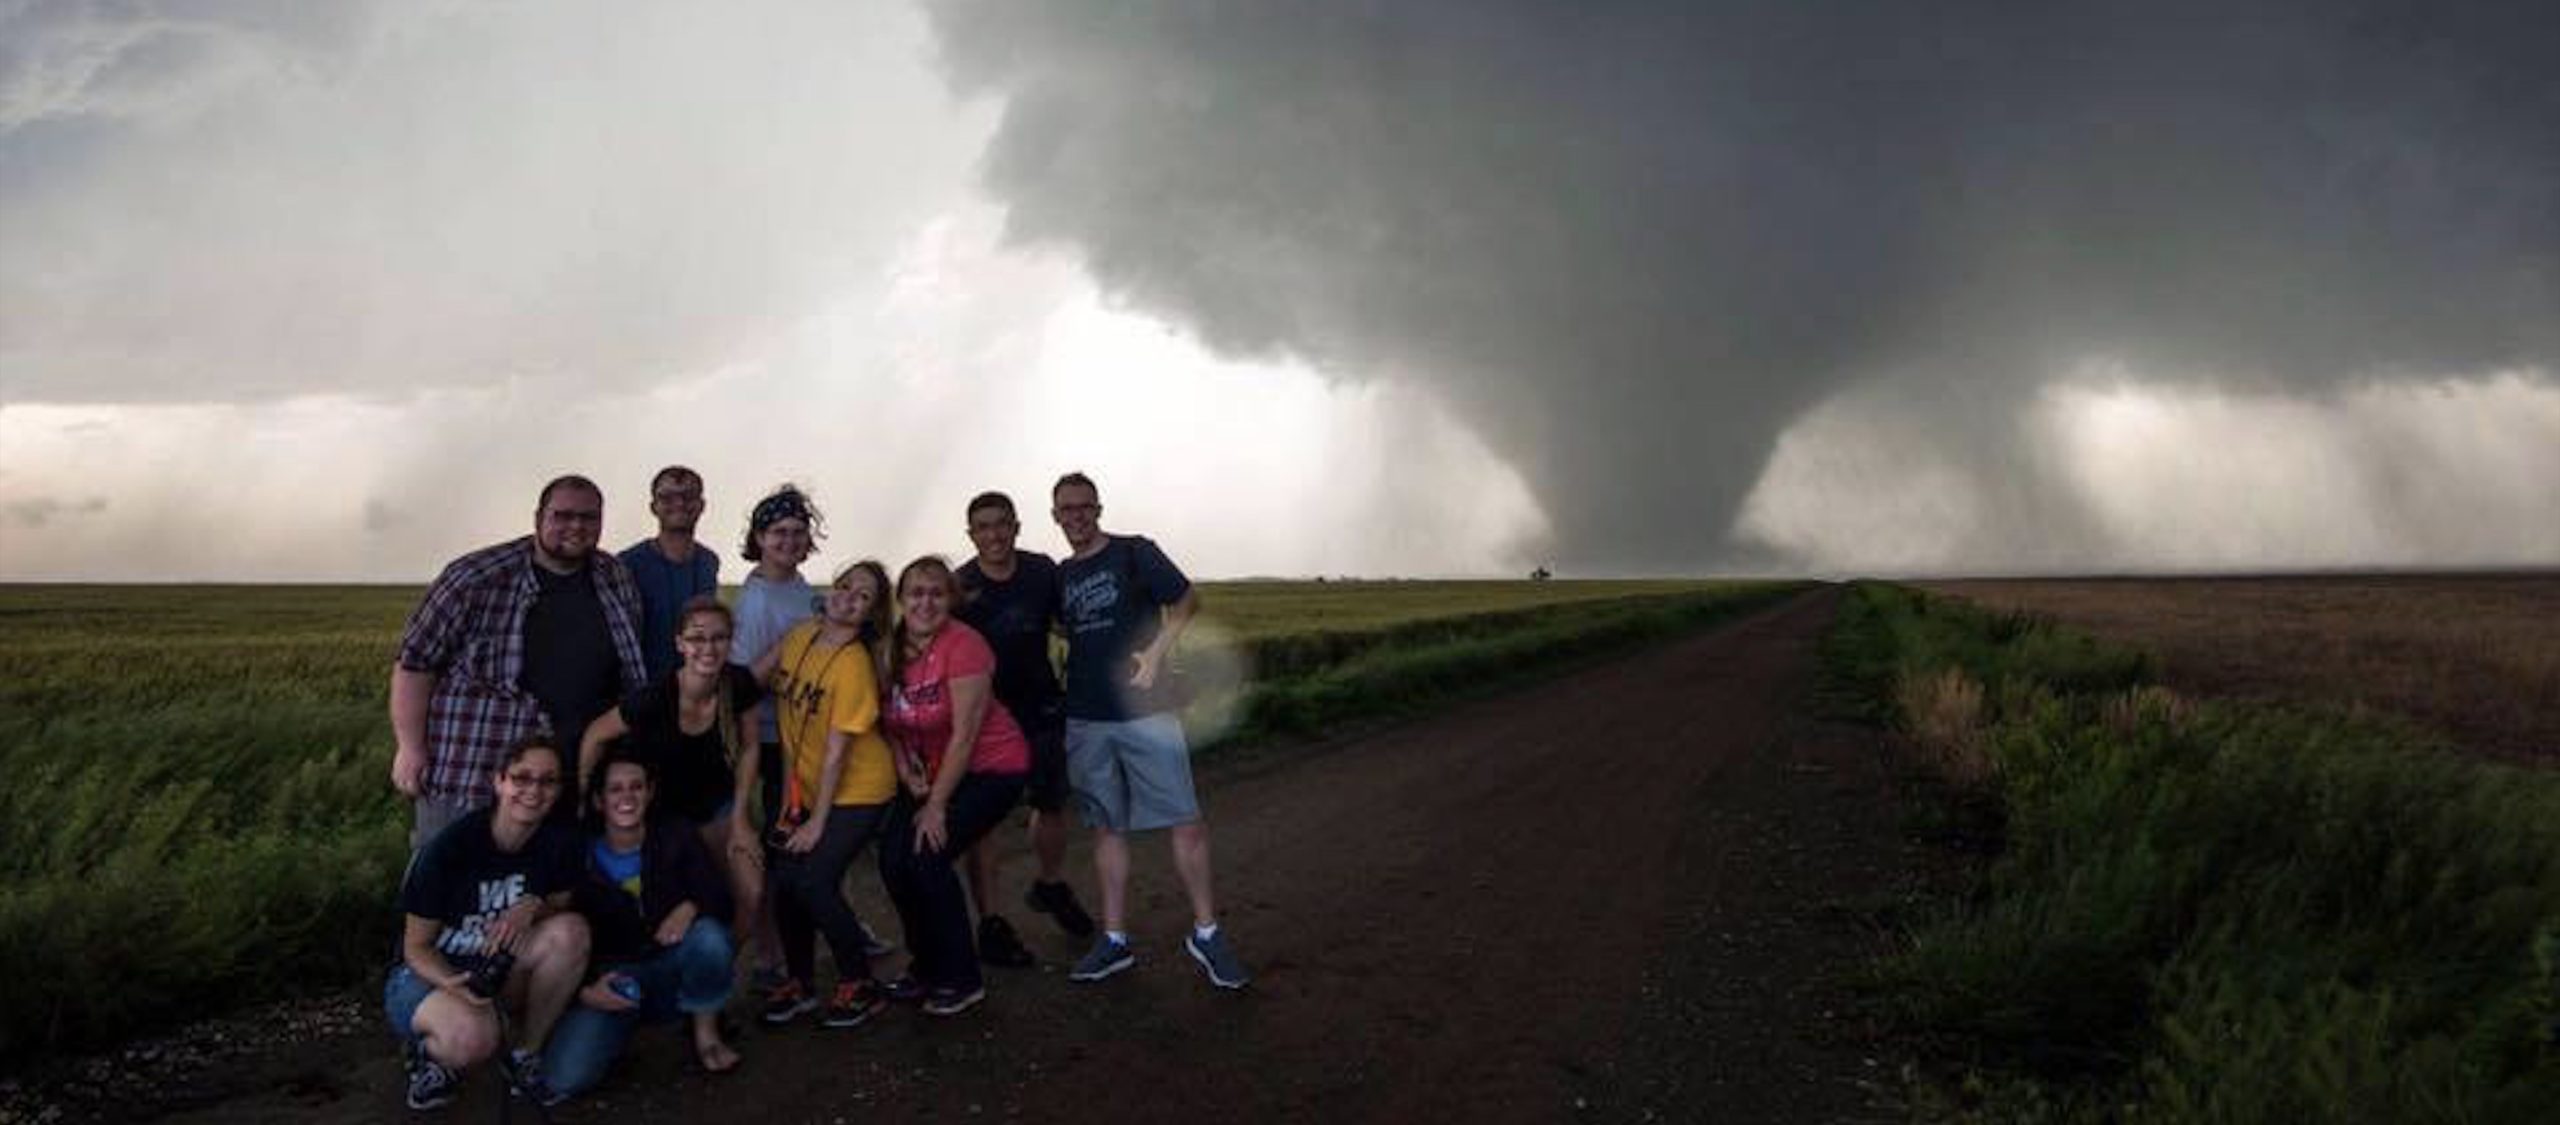 Students in front of Tornado